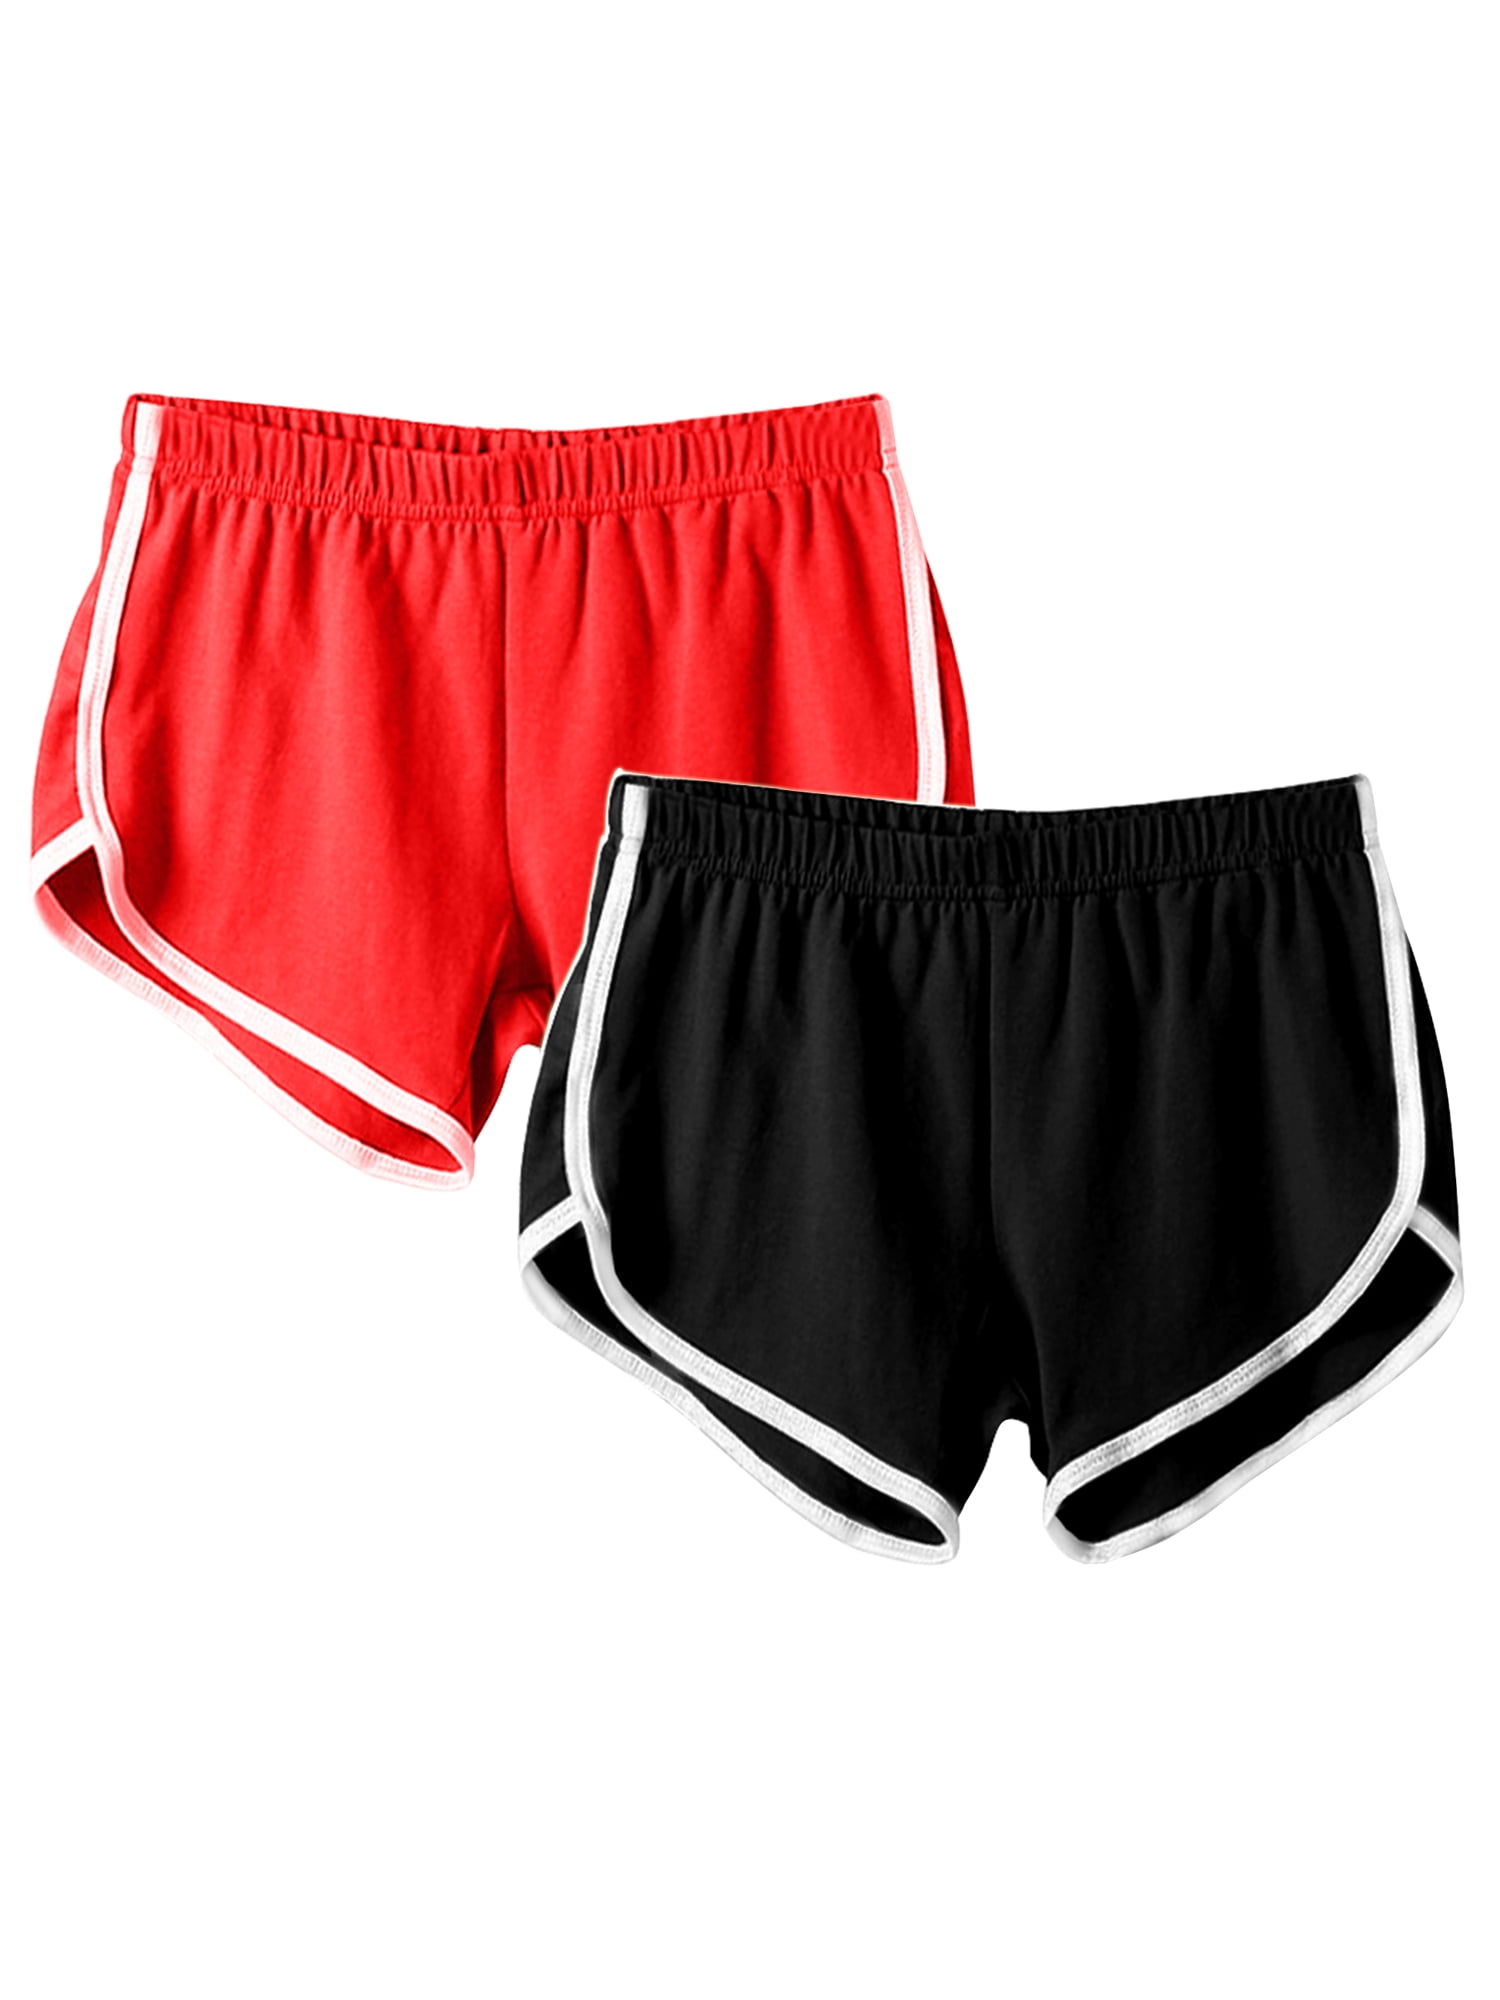 Women's New Double Side Stripe ladies Cotton Active Shorts Gym Cycling Hot Pants 